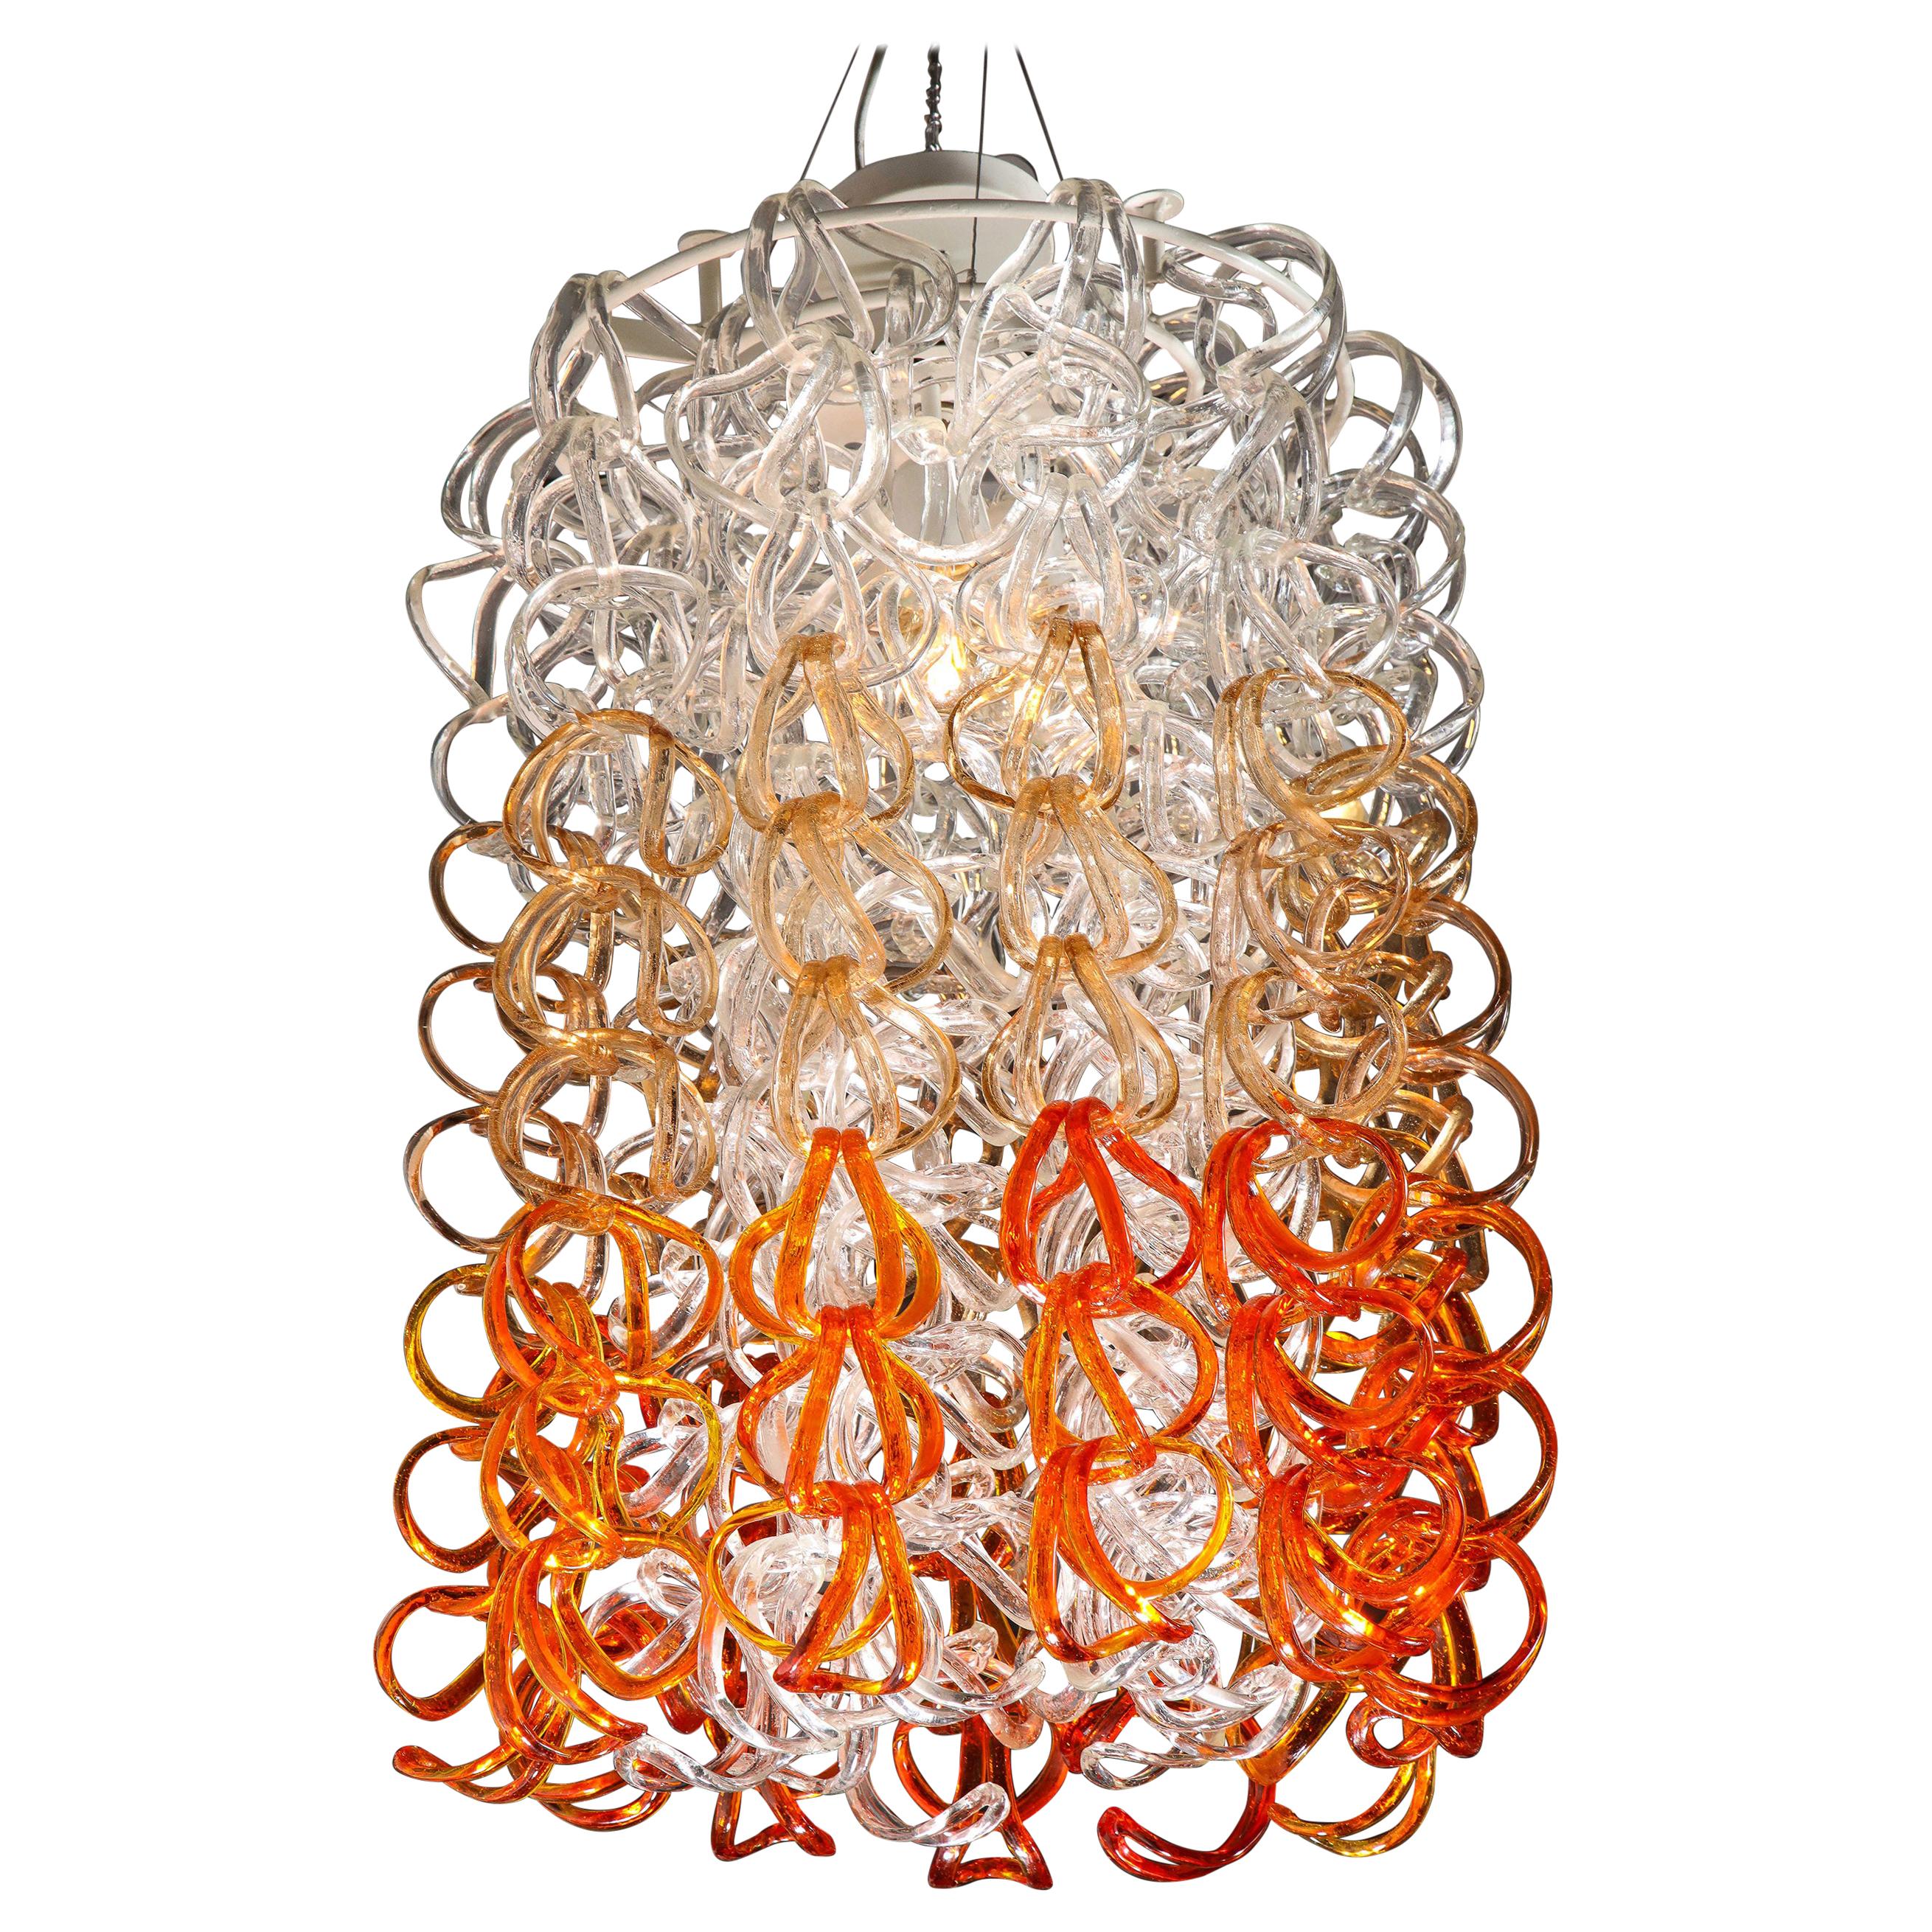 "Giogali" Chain Link Chandelier by Angelo Mangiarotti for Vistosi, 1970s